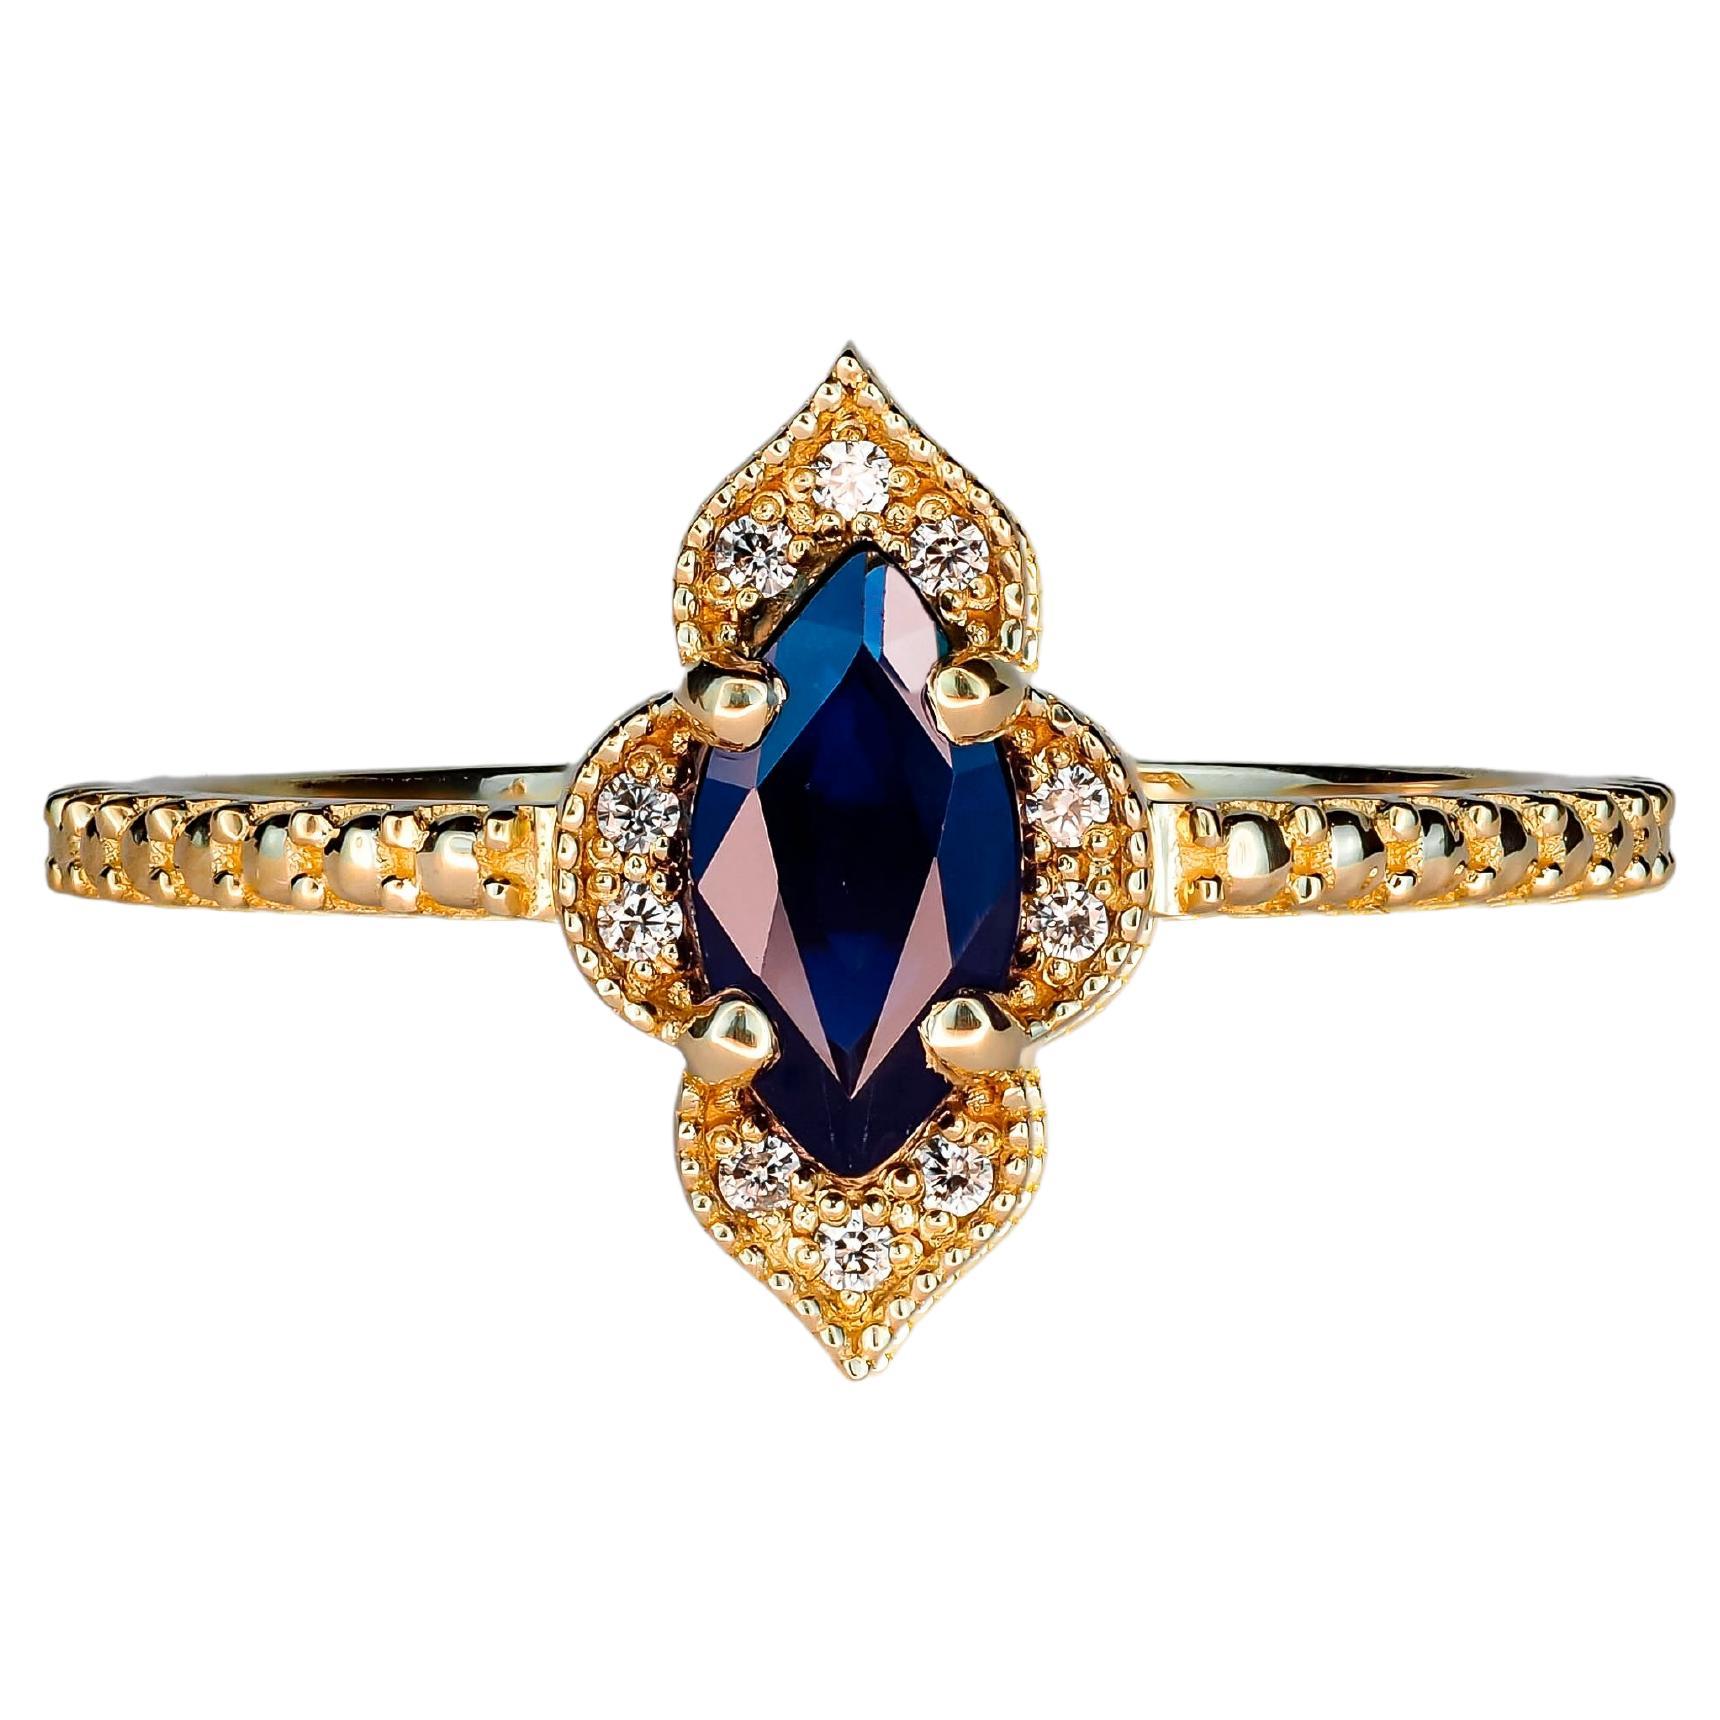 For Sale:  14k Gold Ring with Sapphire and Diamonds